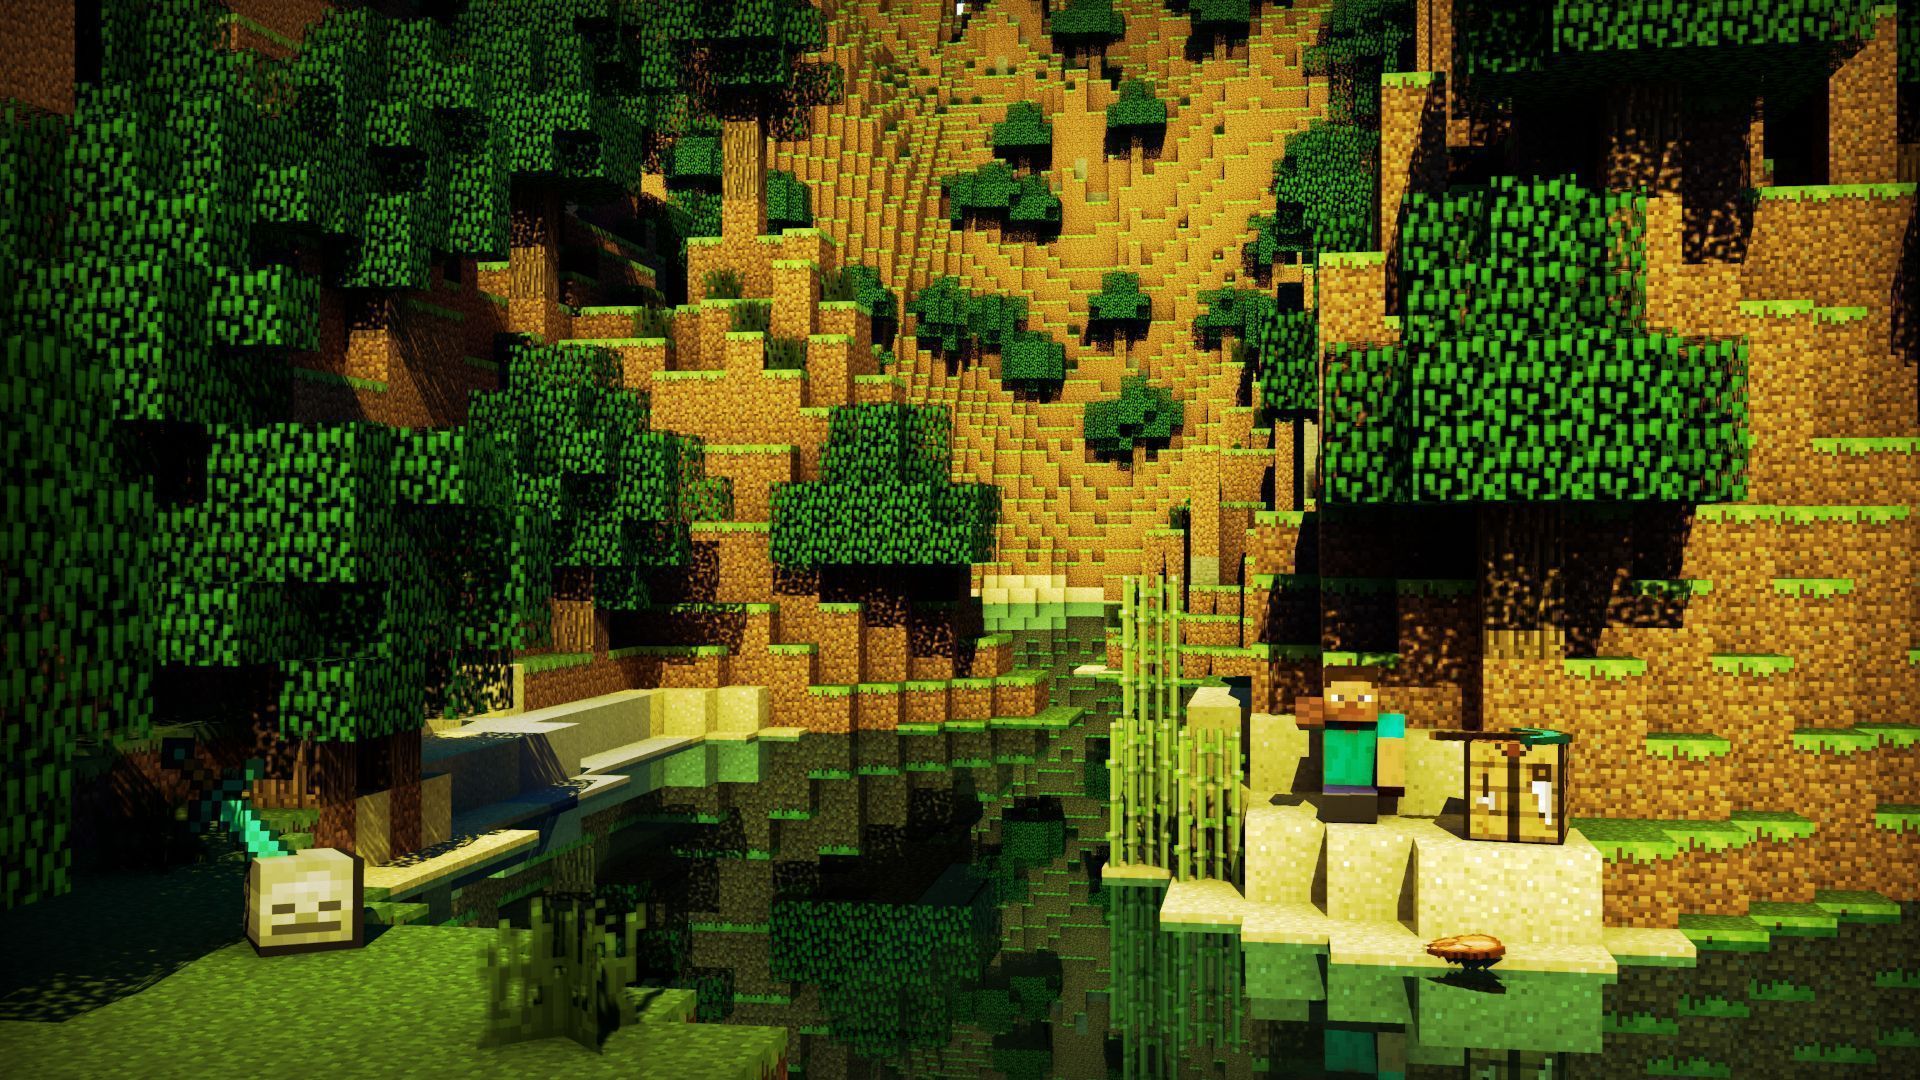 free-blog-backgrounds-minecraft-awesome-building-1920x1080.jpg